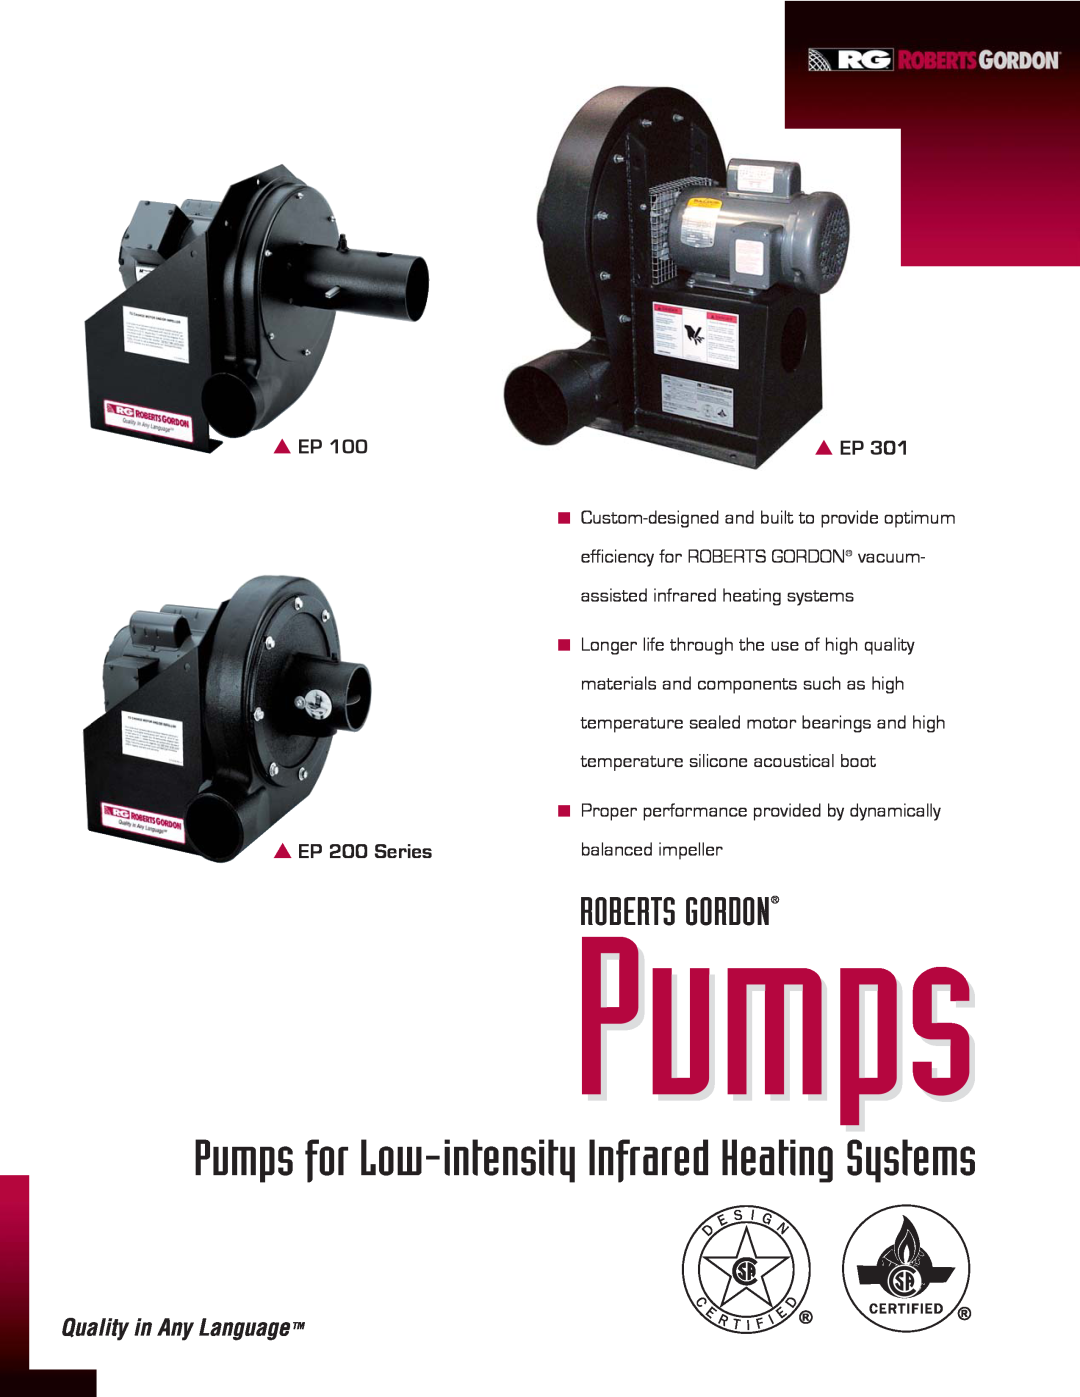 Roberts Gorden EP 100, EP 301 manual Pumps for Low-intensityInfrared Heating Systems, Roberts Gordon, EP 200 Series 